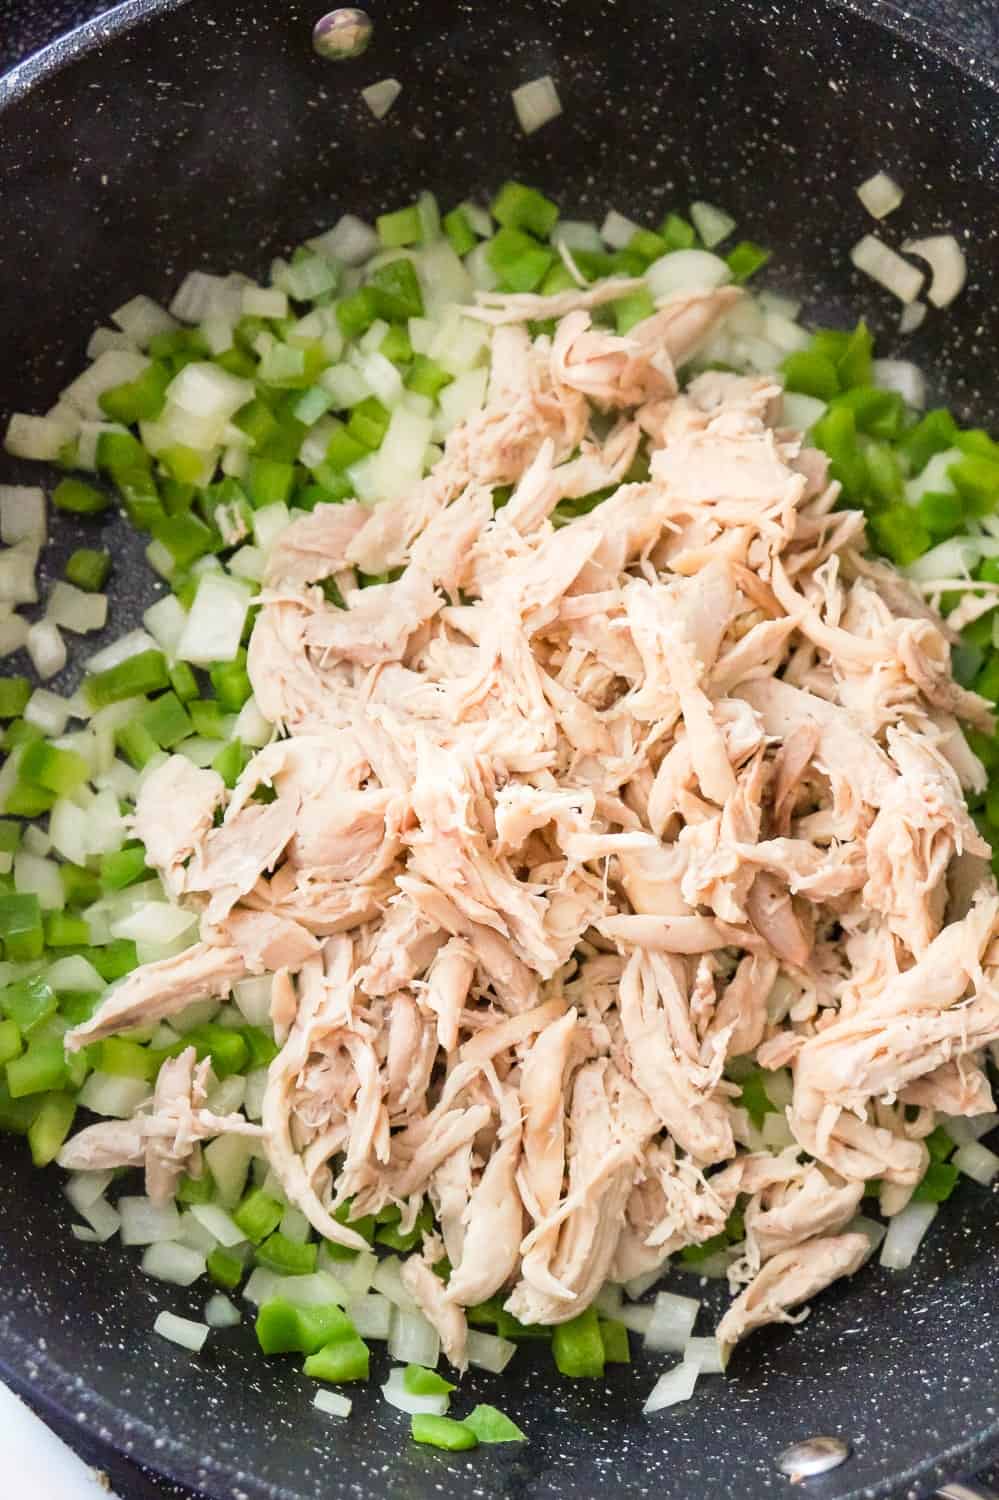 shredded chicken, diced green peppers and diced onions in a saute pan